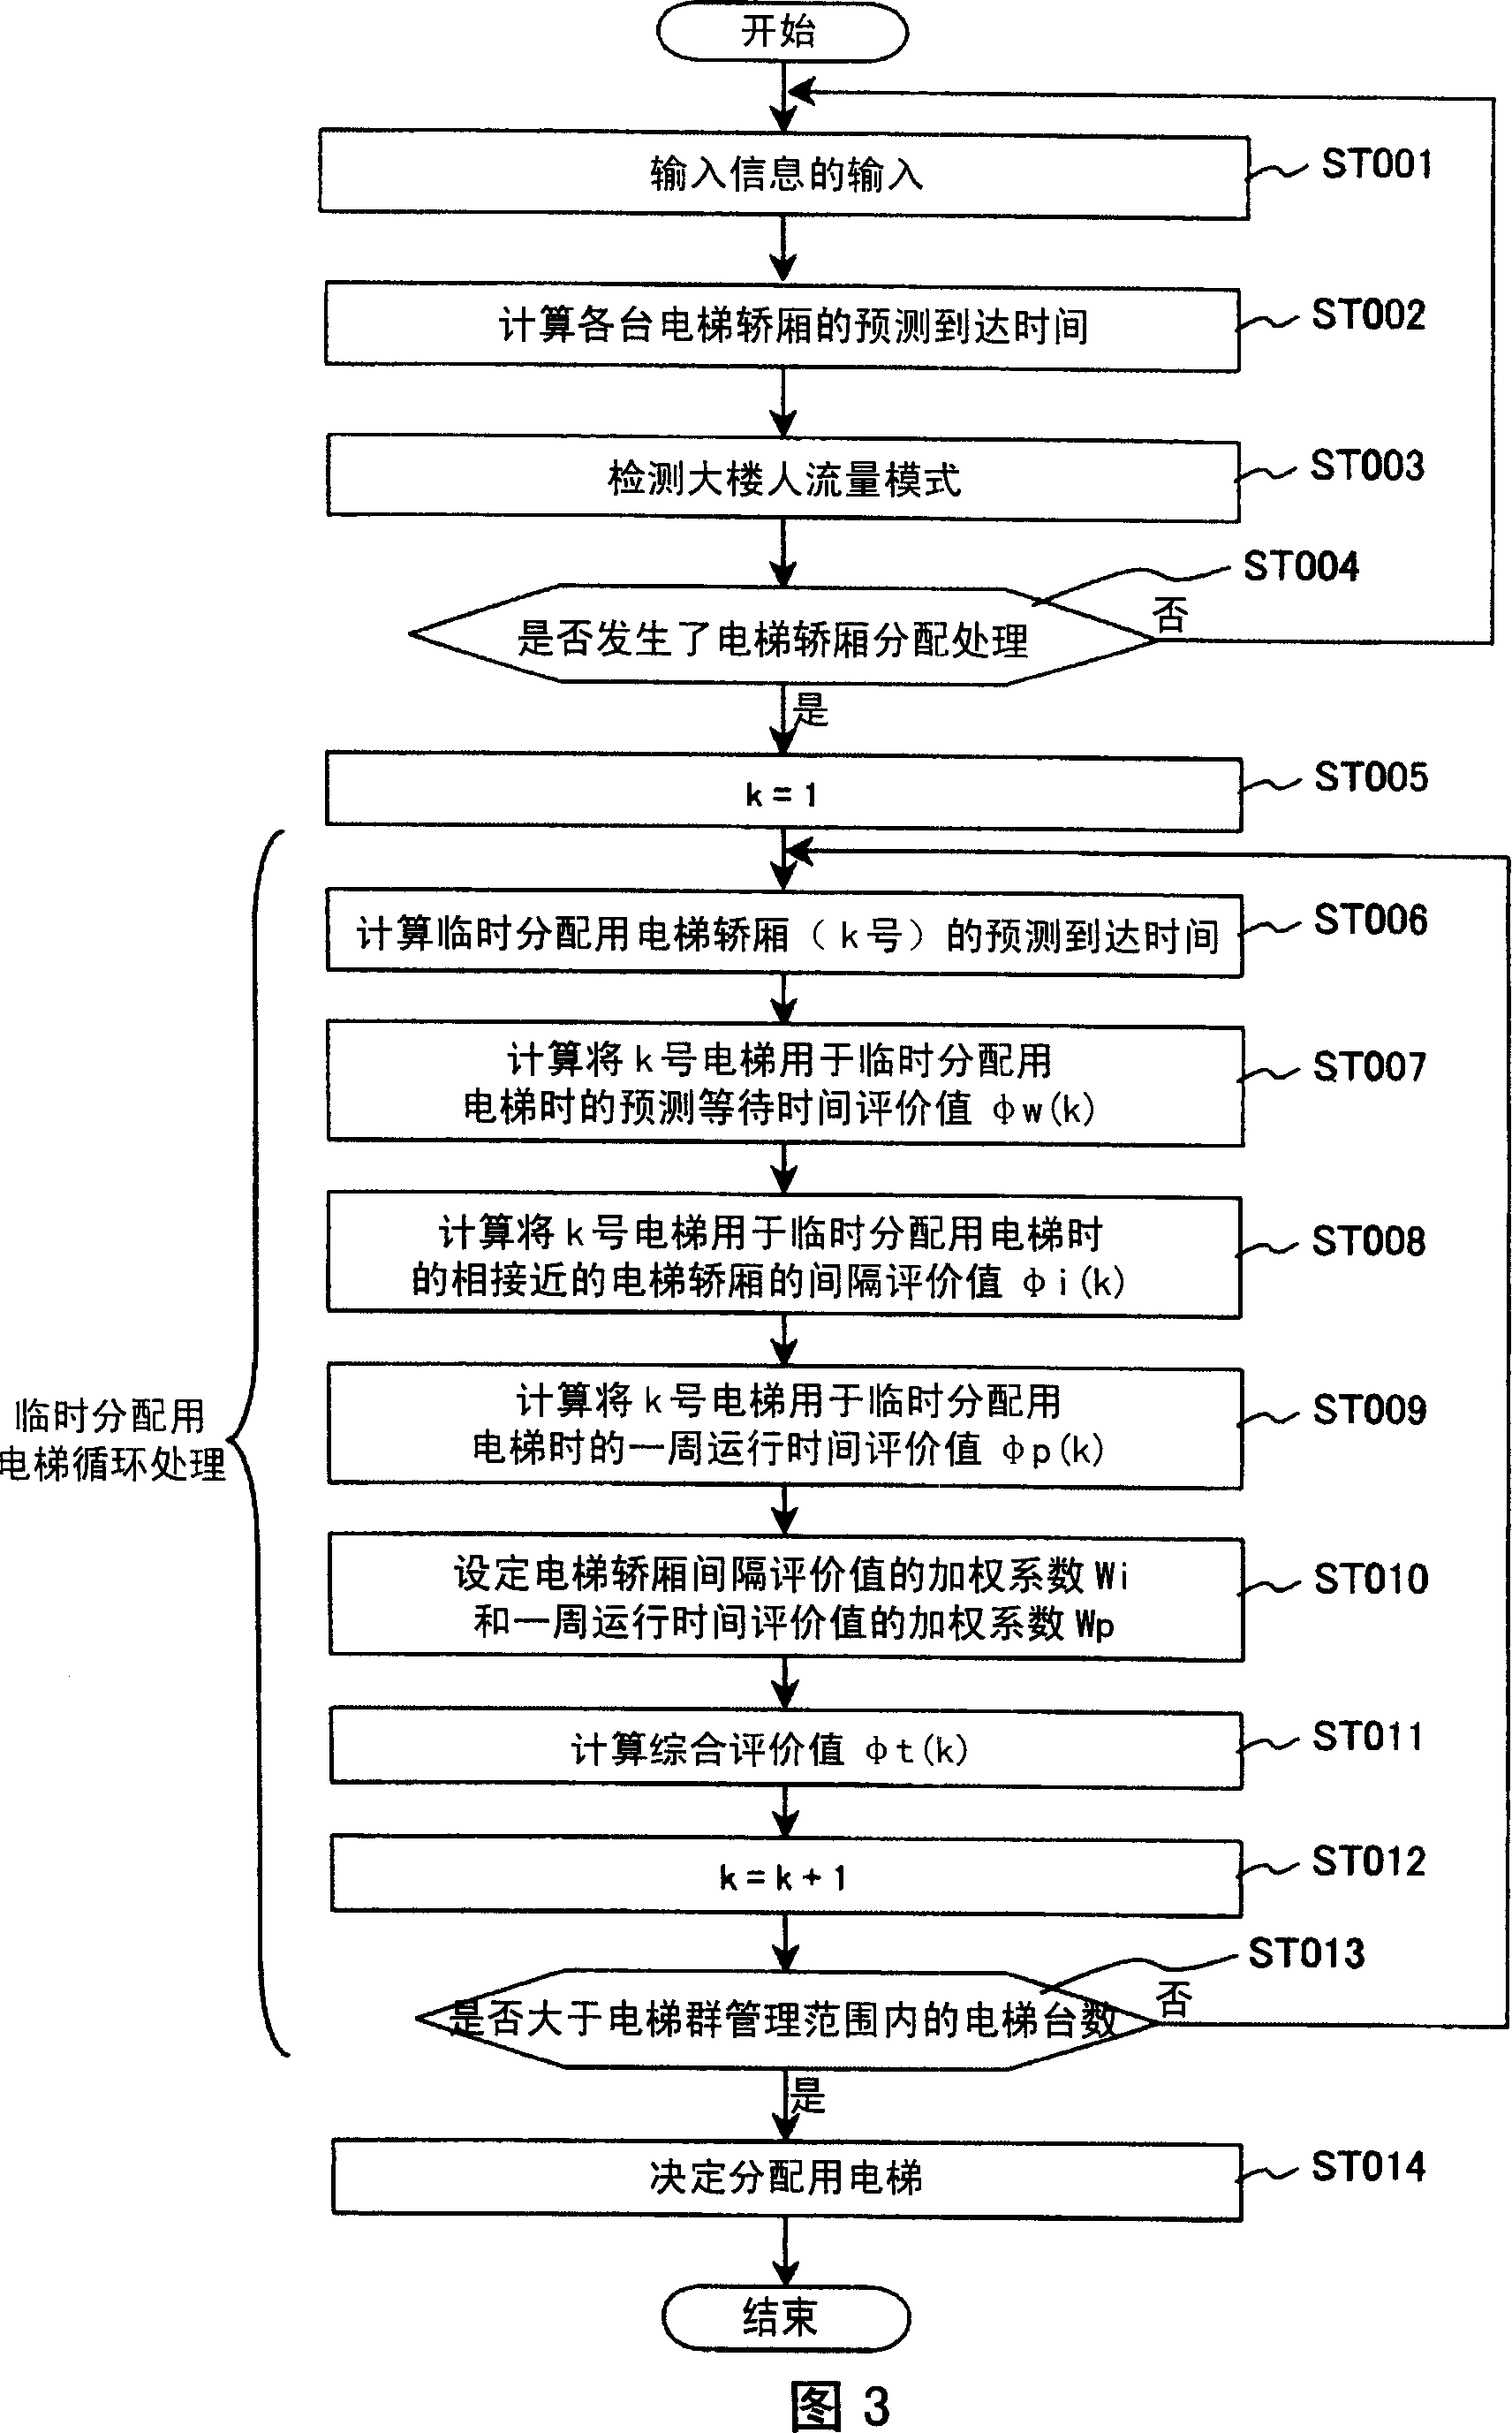 Lift group management control method and system